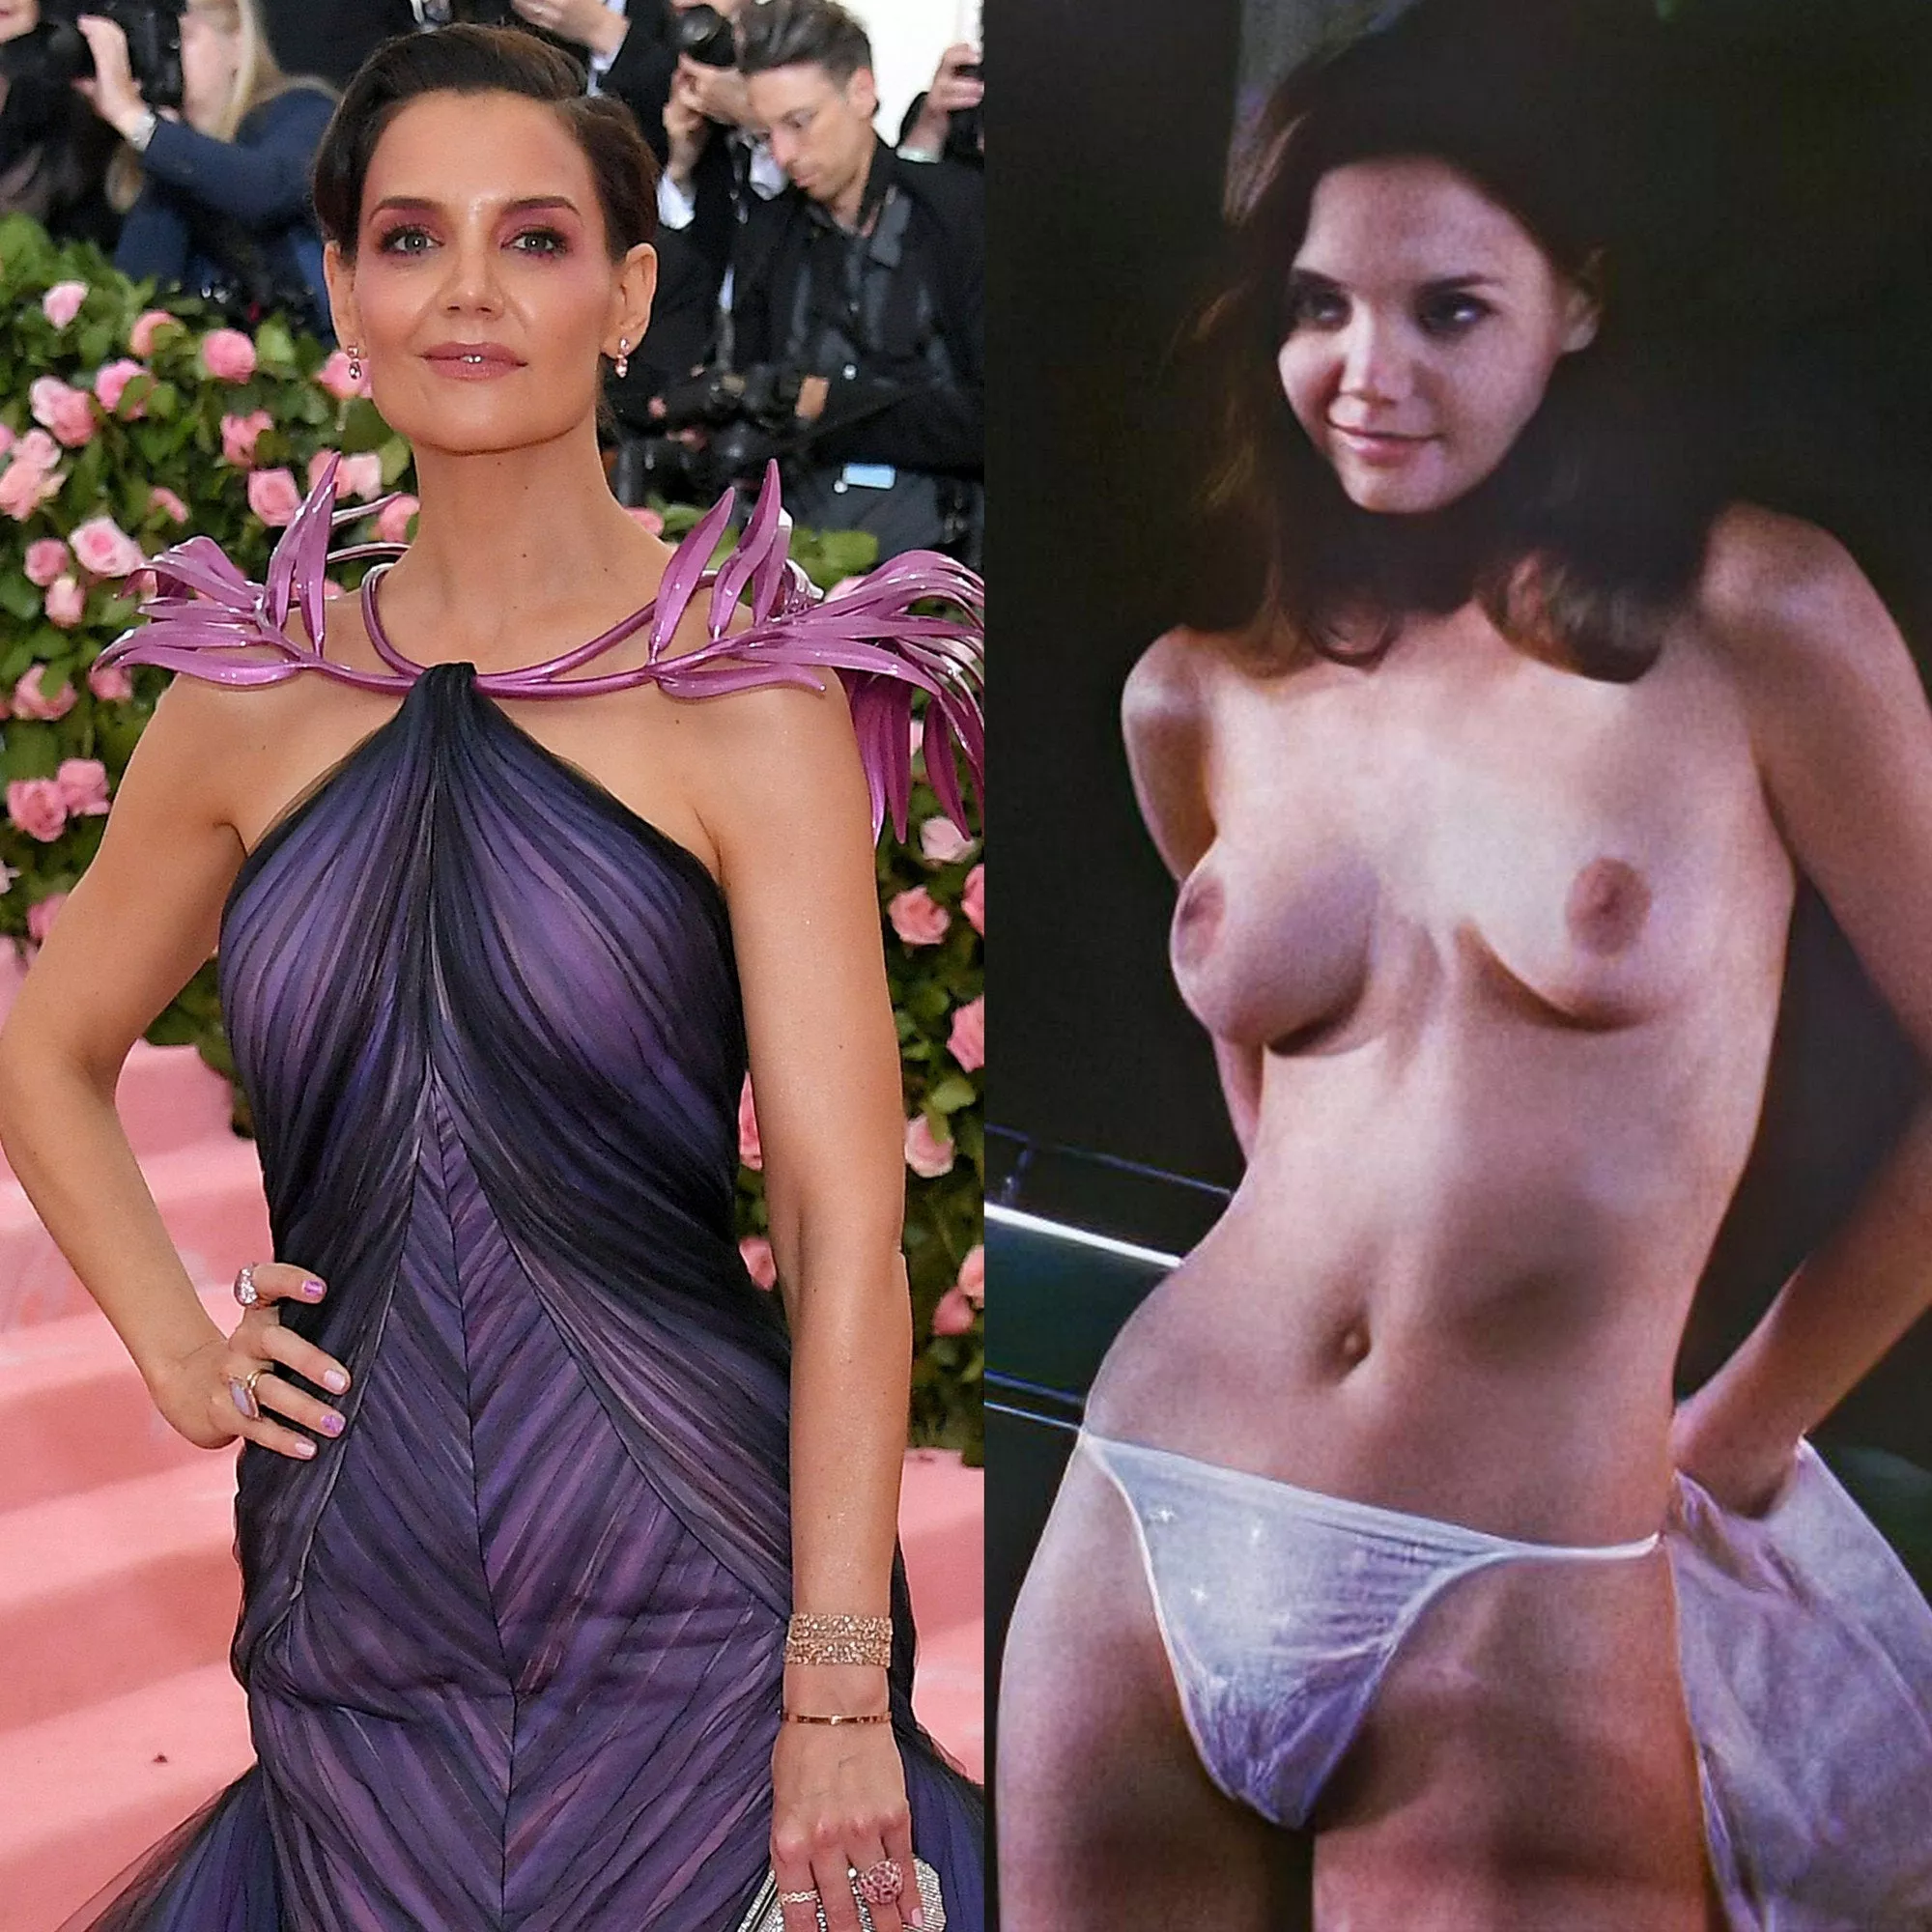 caitlyn hennessy share katie holmes nude pictures photos